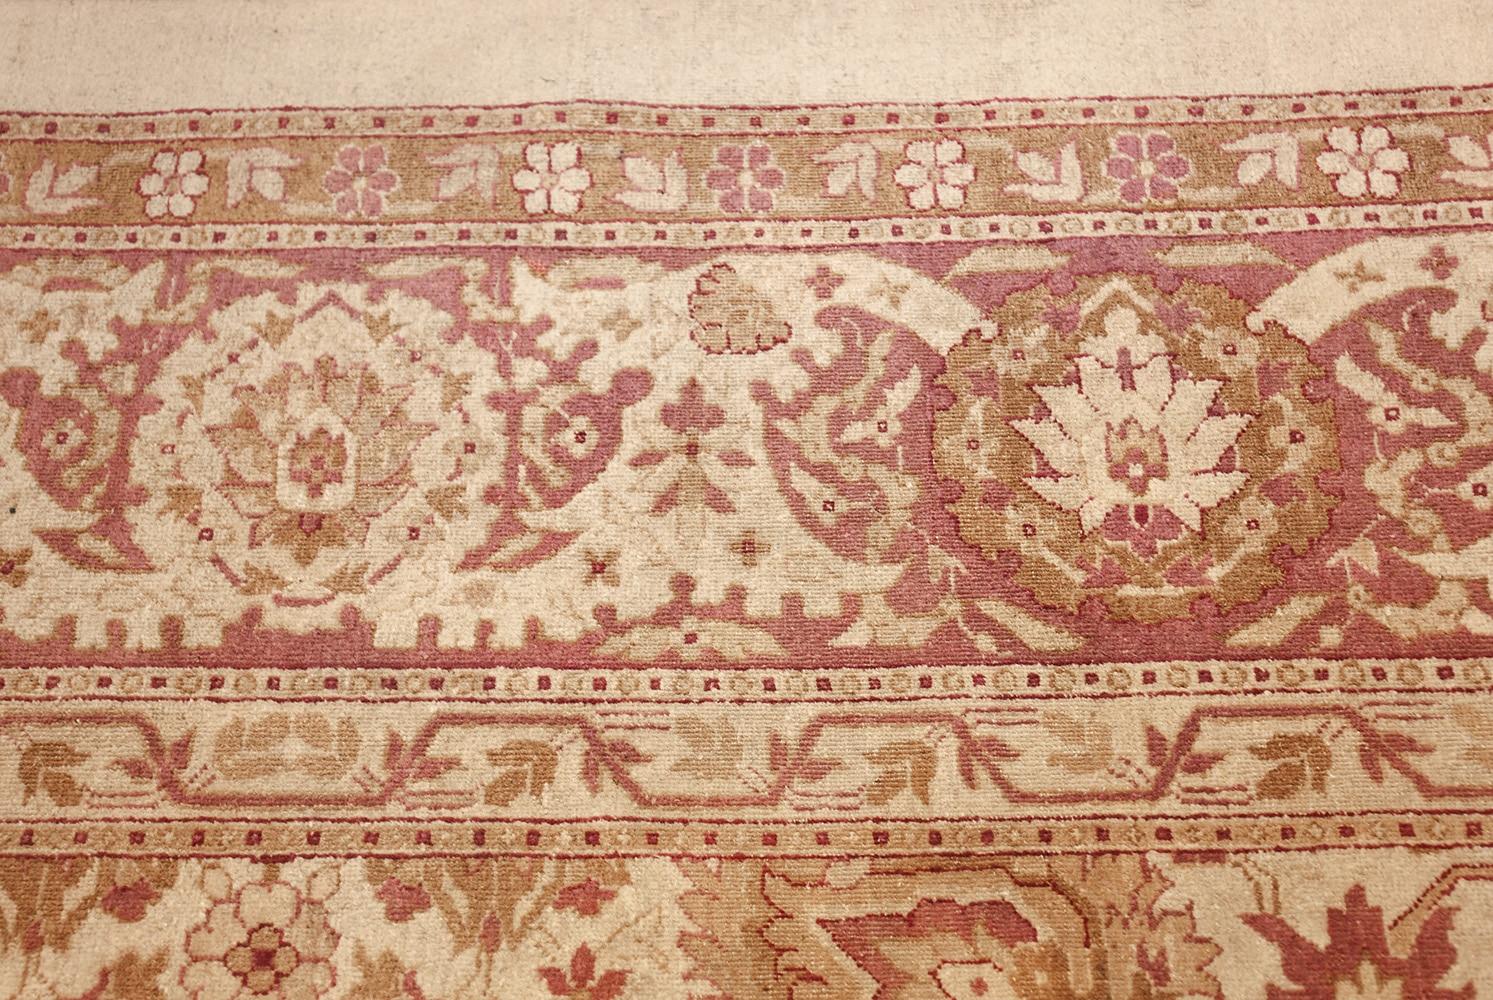 Antique Indian Amritsar Carpet. Size: 11 ft x 17 ft 6 in (3.35 m x 5.33 m) 2